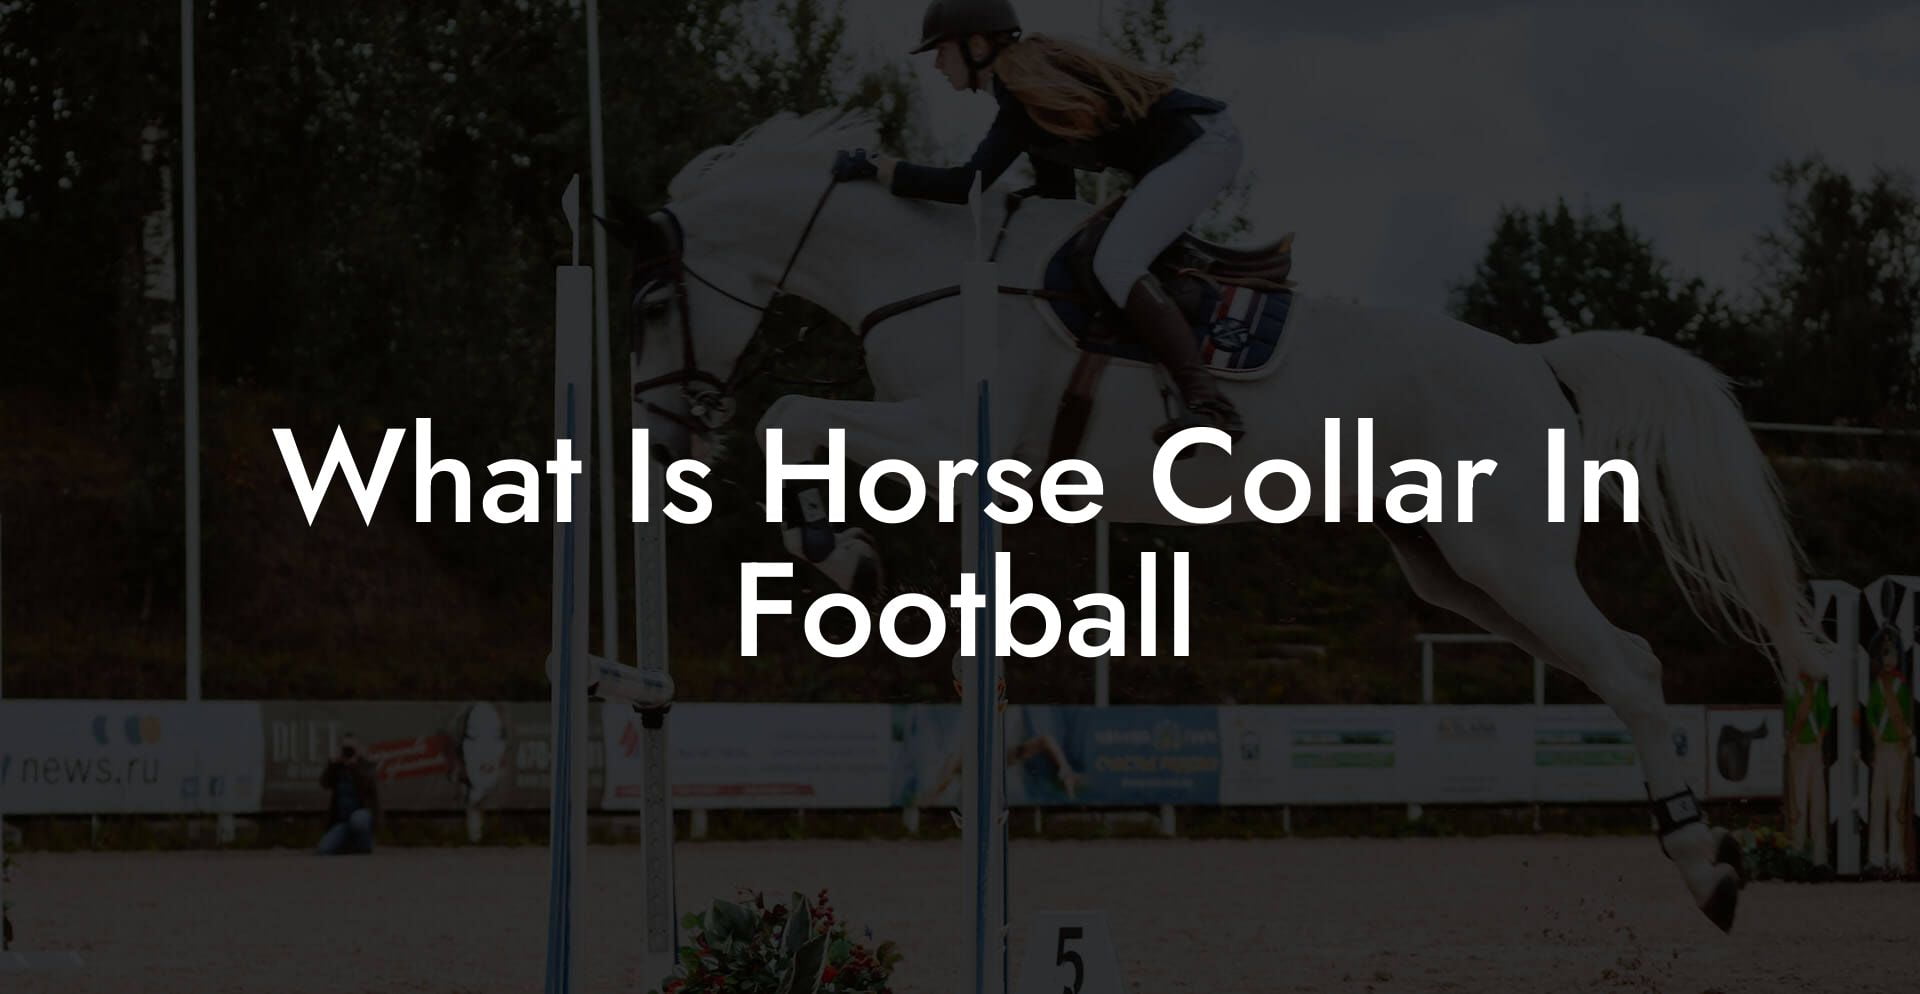 What Is Horse Collar In Football